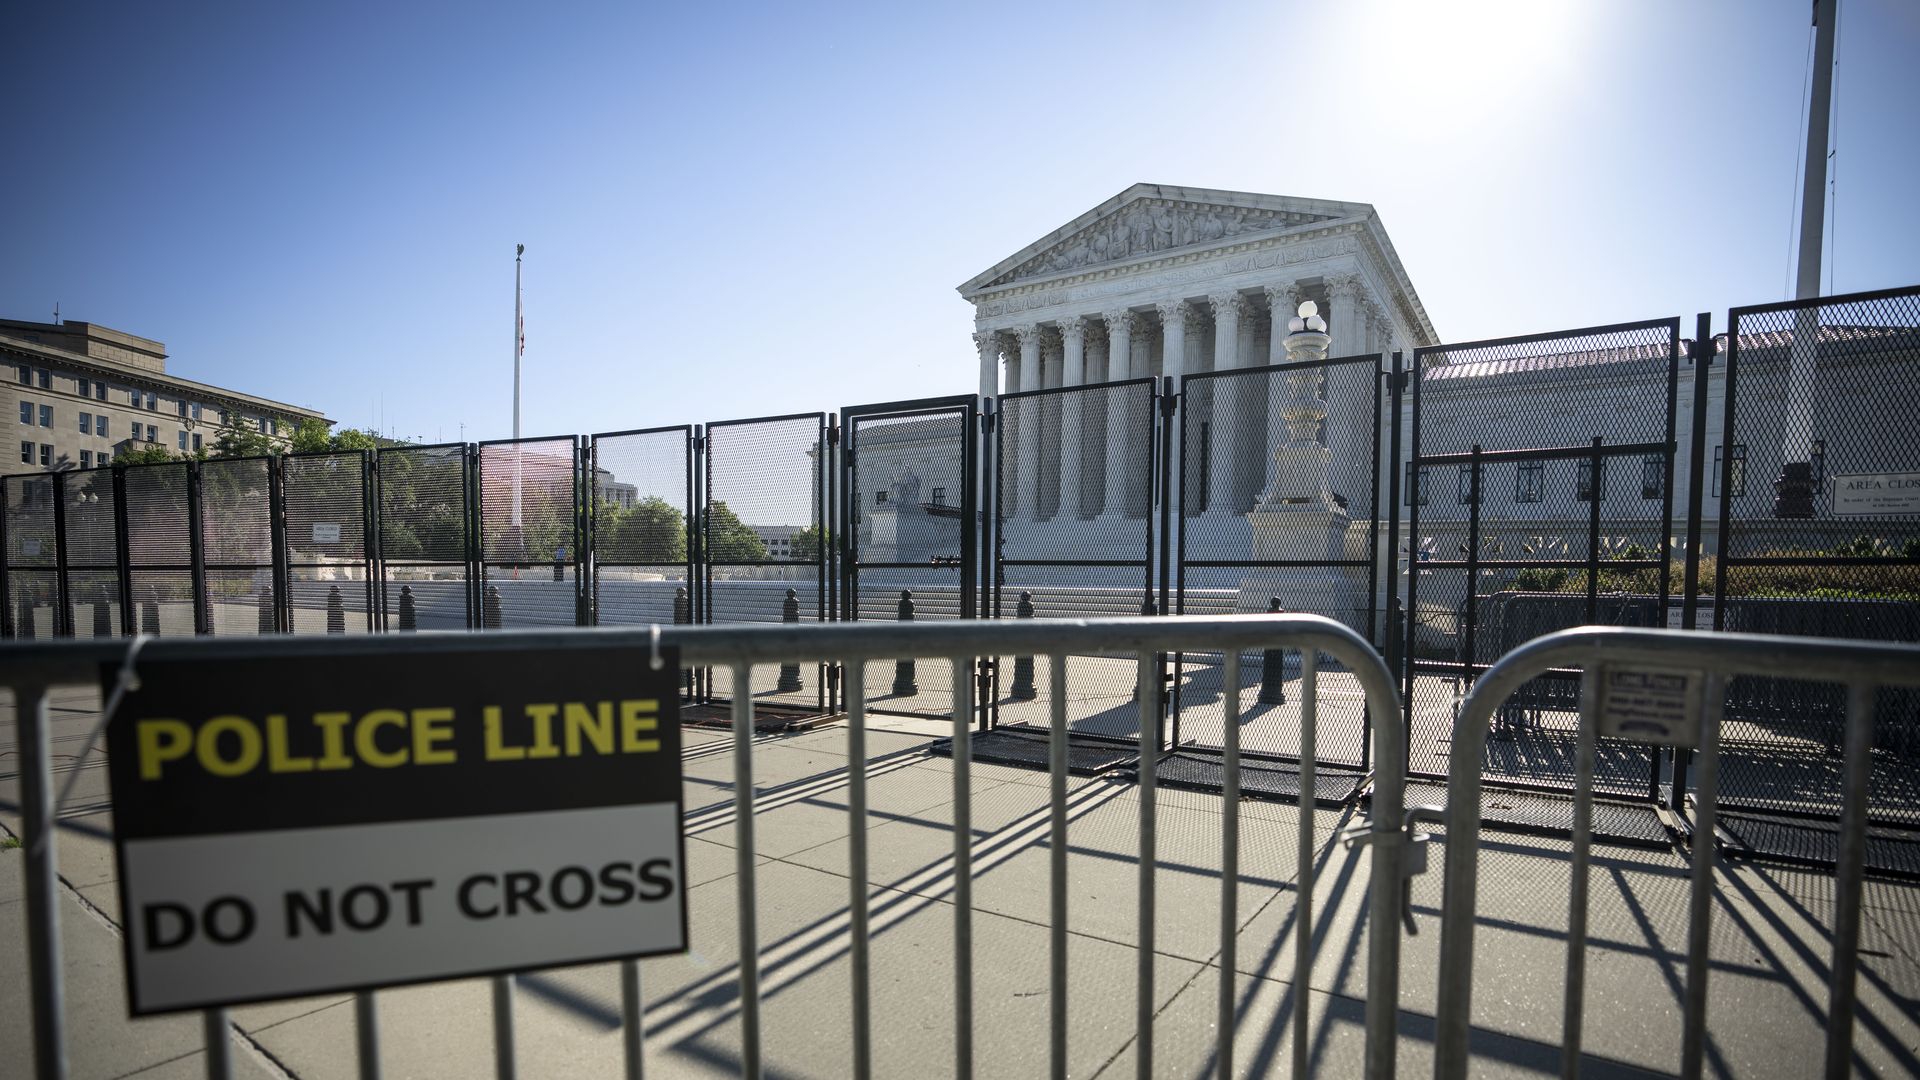 Photo of police fencing in front of the Supreme Court building